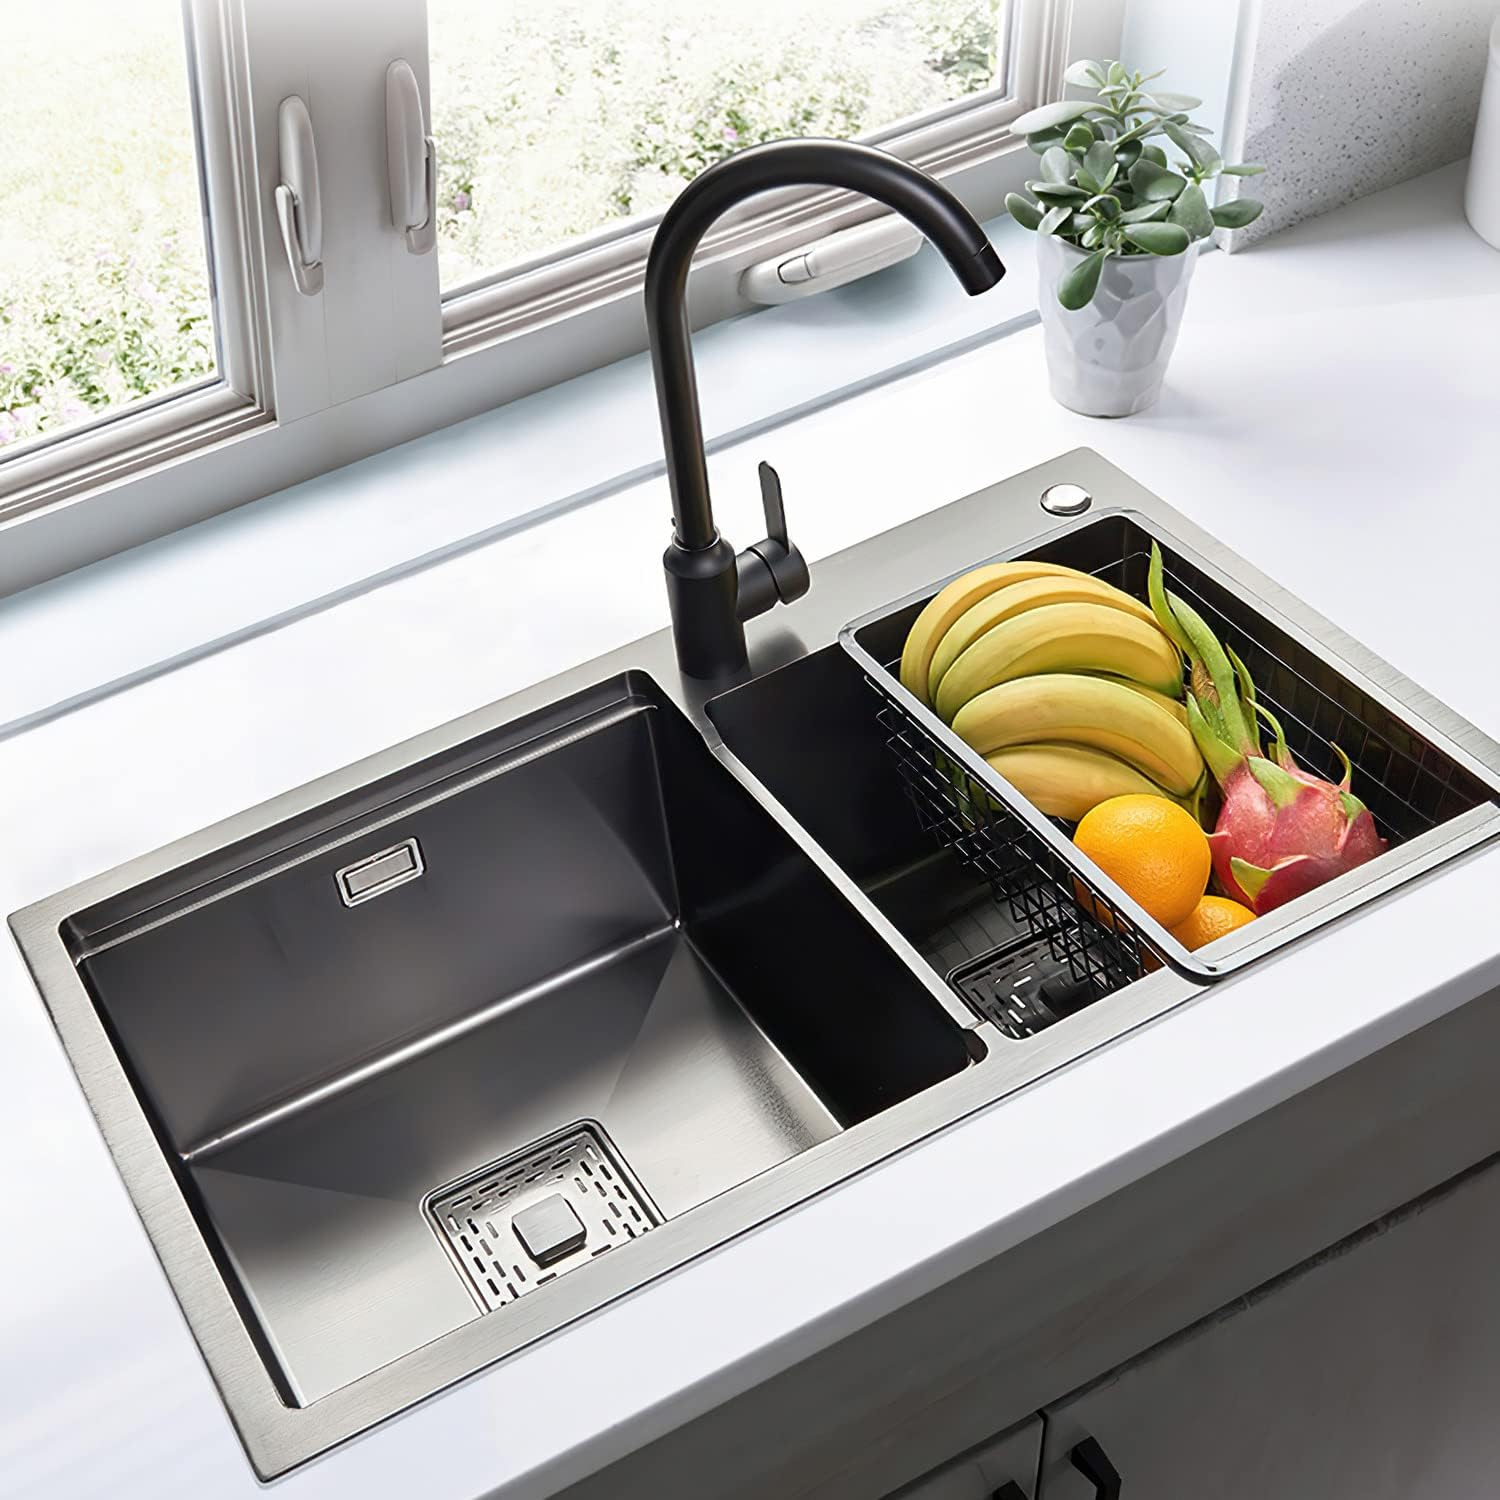 kitchen sink cleaning tips in tamil